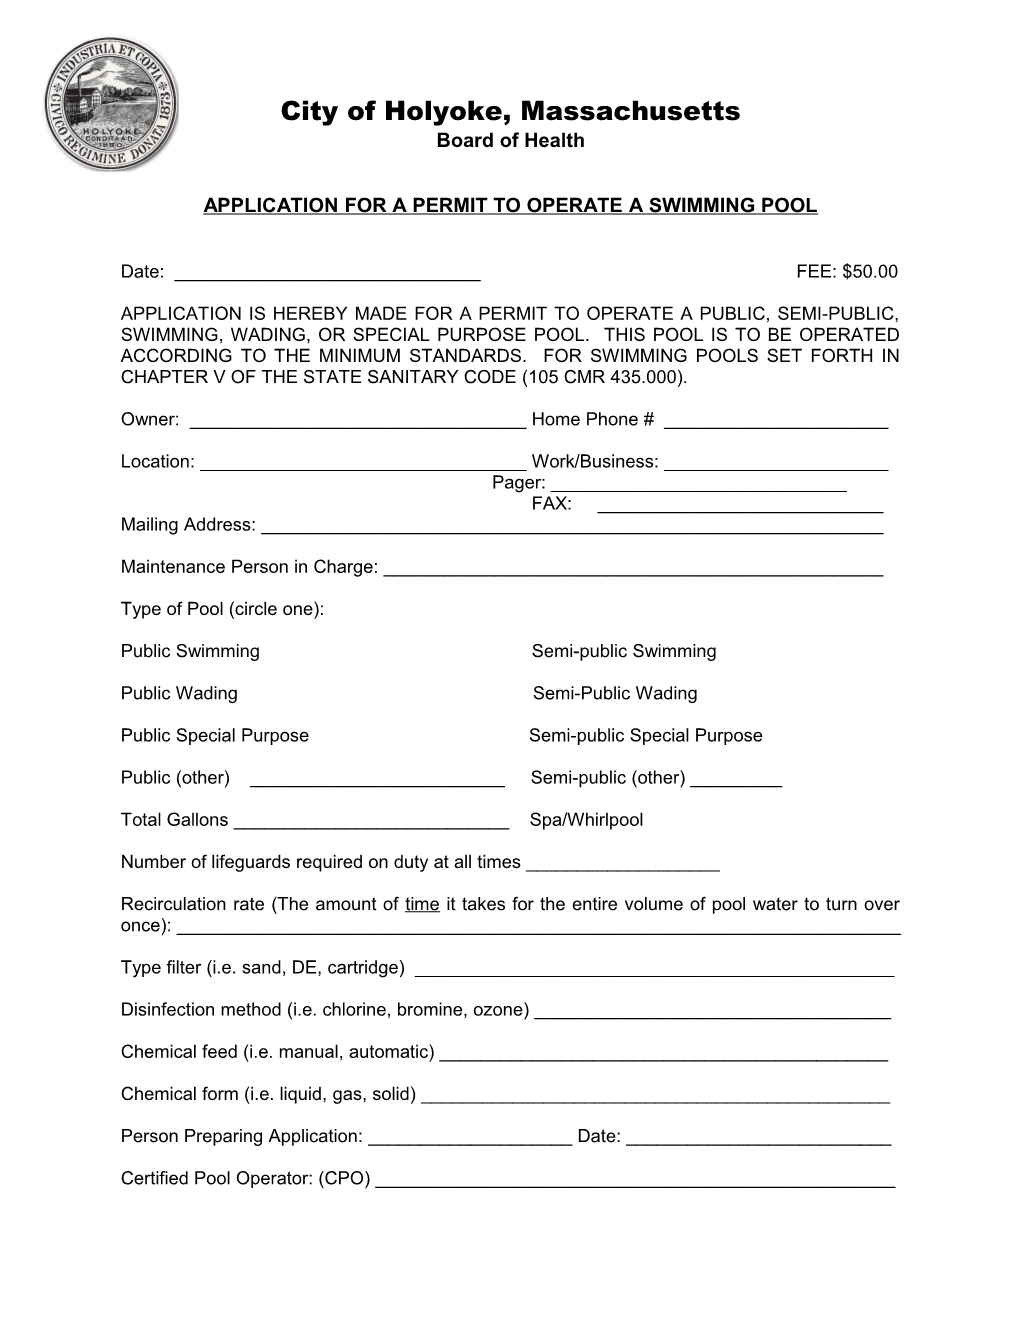 Application for a Permit to Operate a Swimming Pool